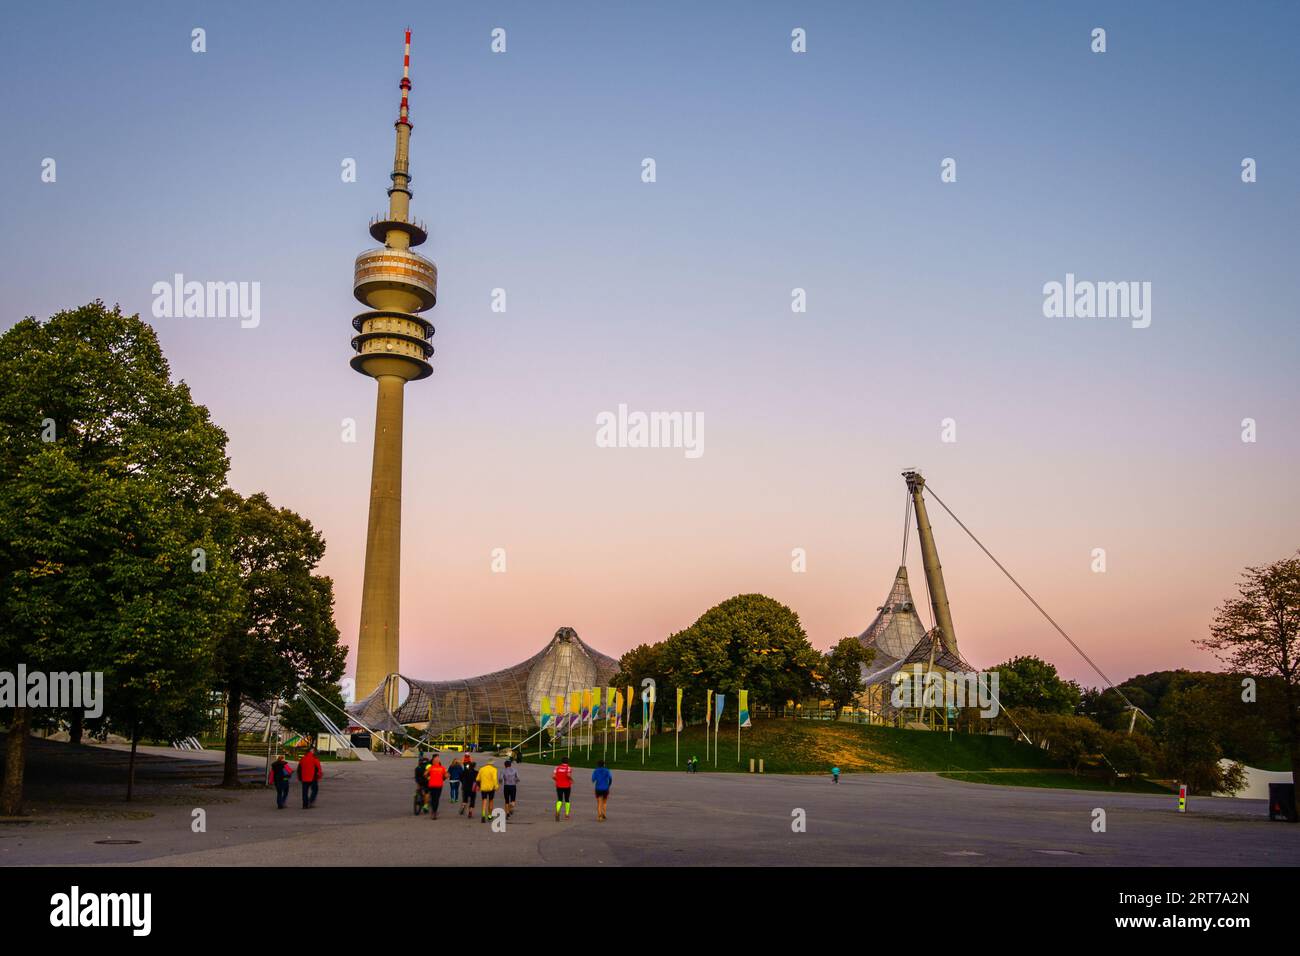 Munich, Germany, September 29, 2015: Olympic Park Munich - a sports and leisure complex which was built for the 1972 Summer Olympics. Stock Photo